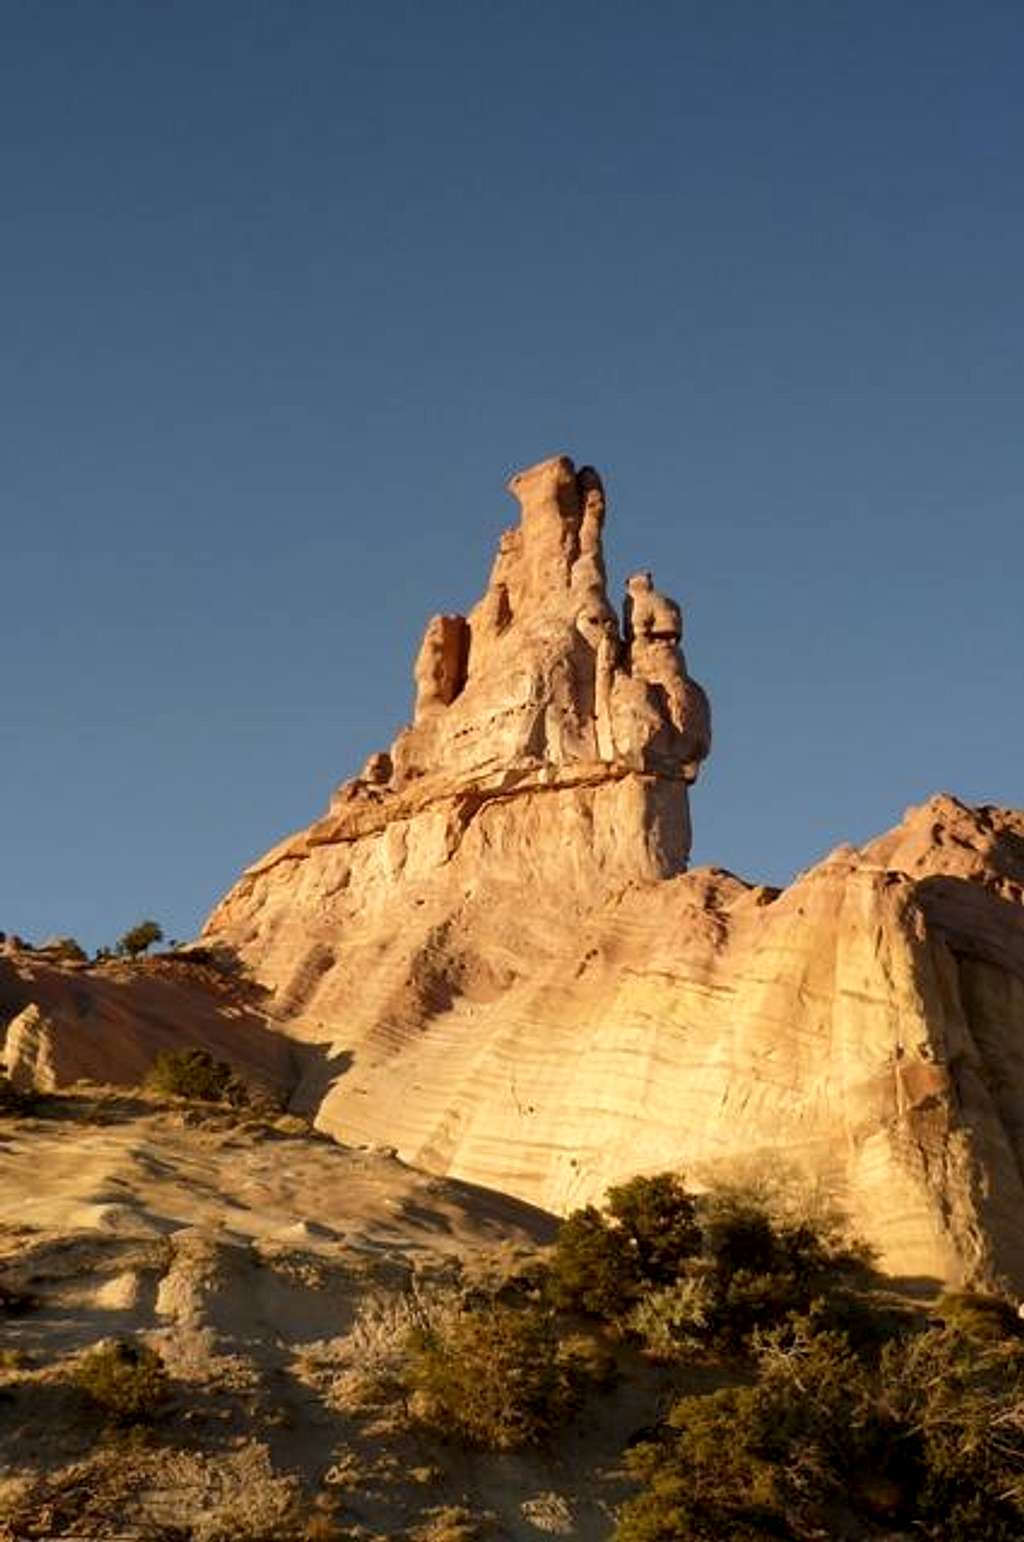 Church Rock in Red Rock Park, New Mexico